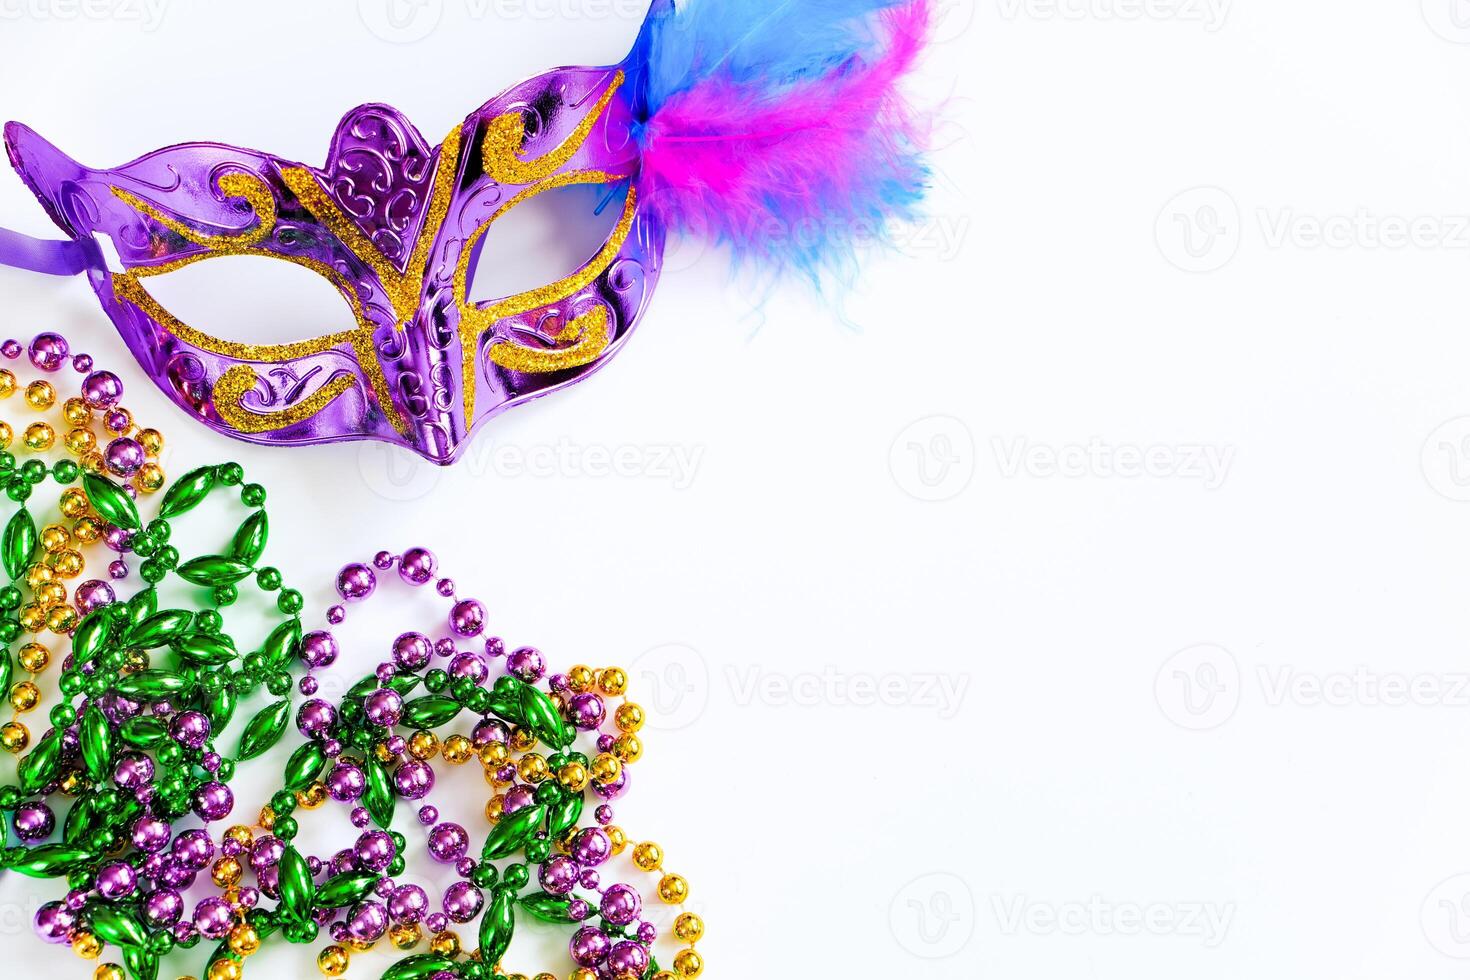 Carnival mask with feathers and colorful beads on white background. Mardi Gras or Fat Tuesday symbol. photo